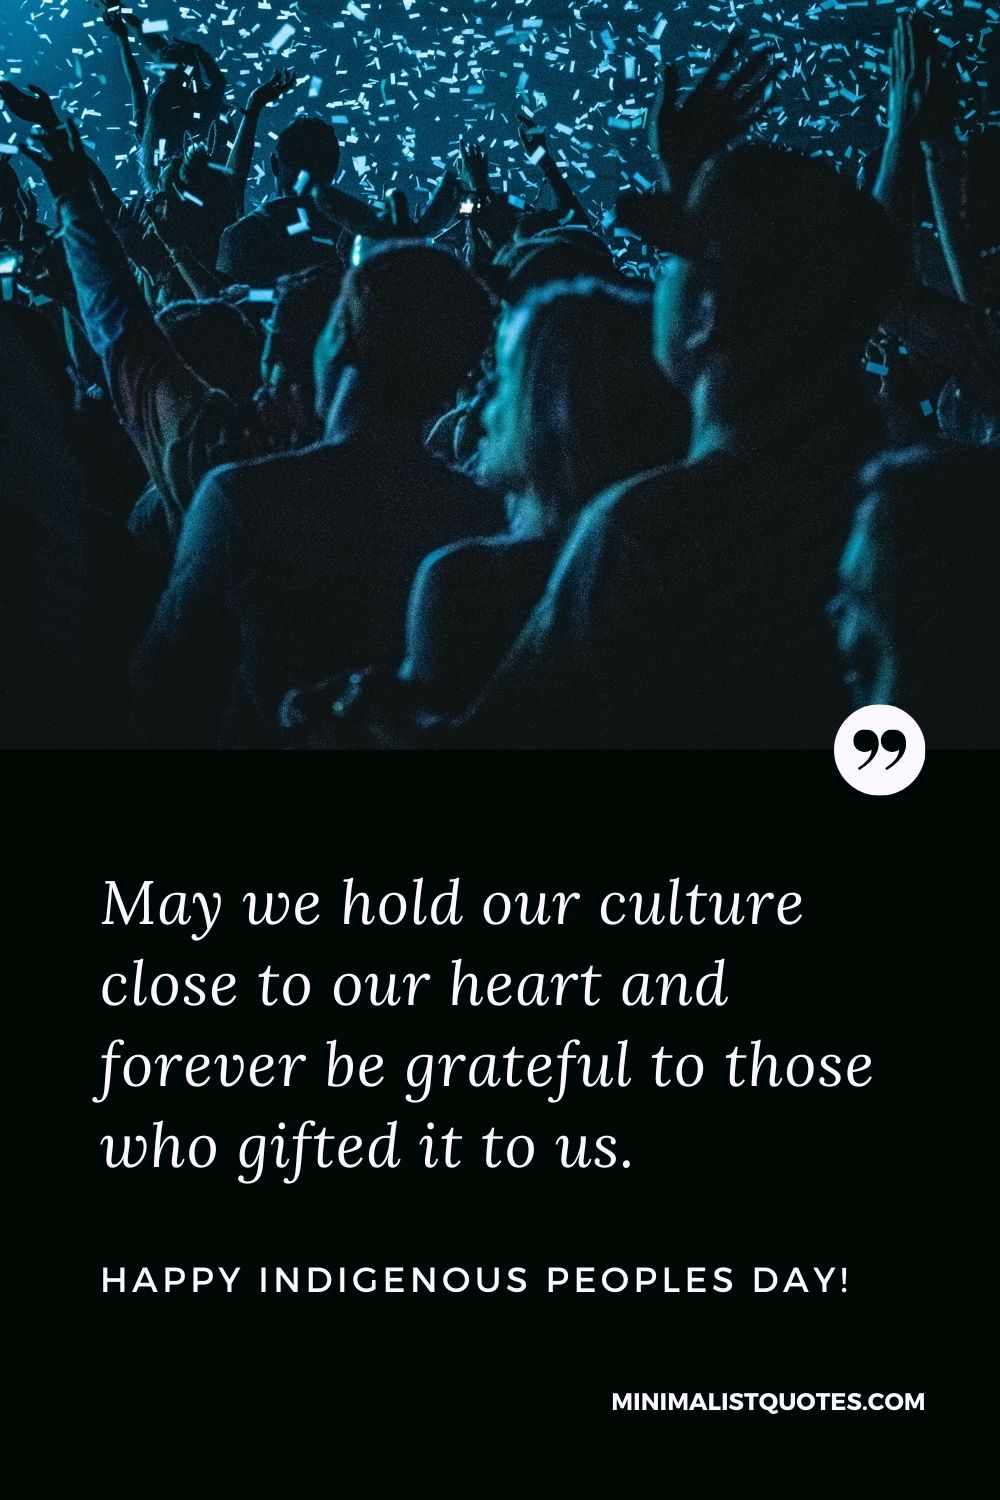 Indigenous Peoples Day Quote, Wish & Message With Image: May we hold our culture close to our heart and forever be grateful to those who gifted it to us. Happy Indigenous Peoples Day!